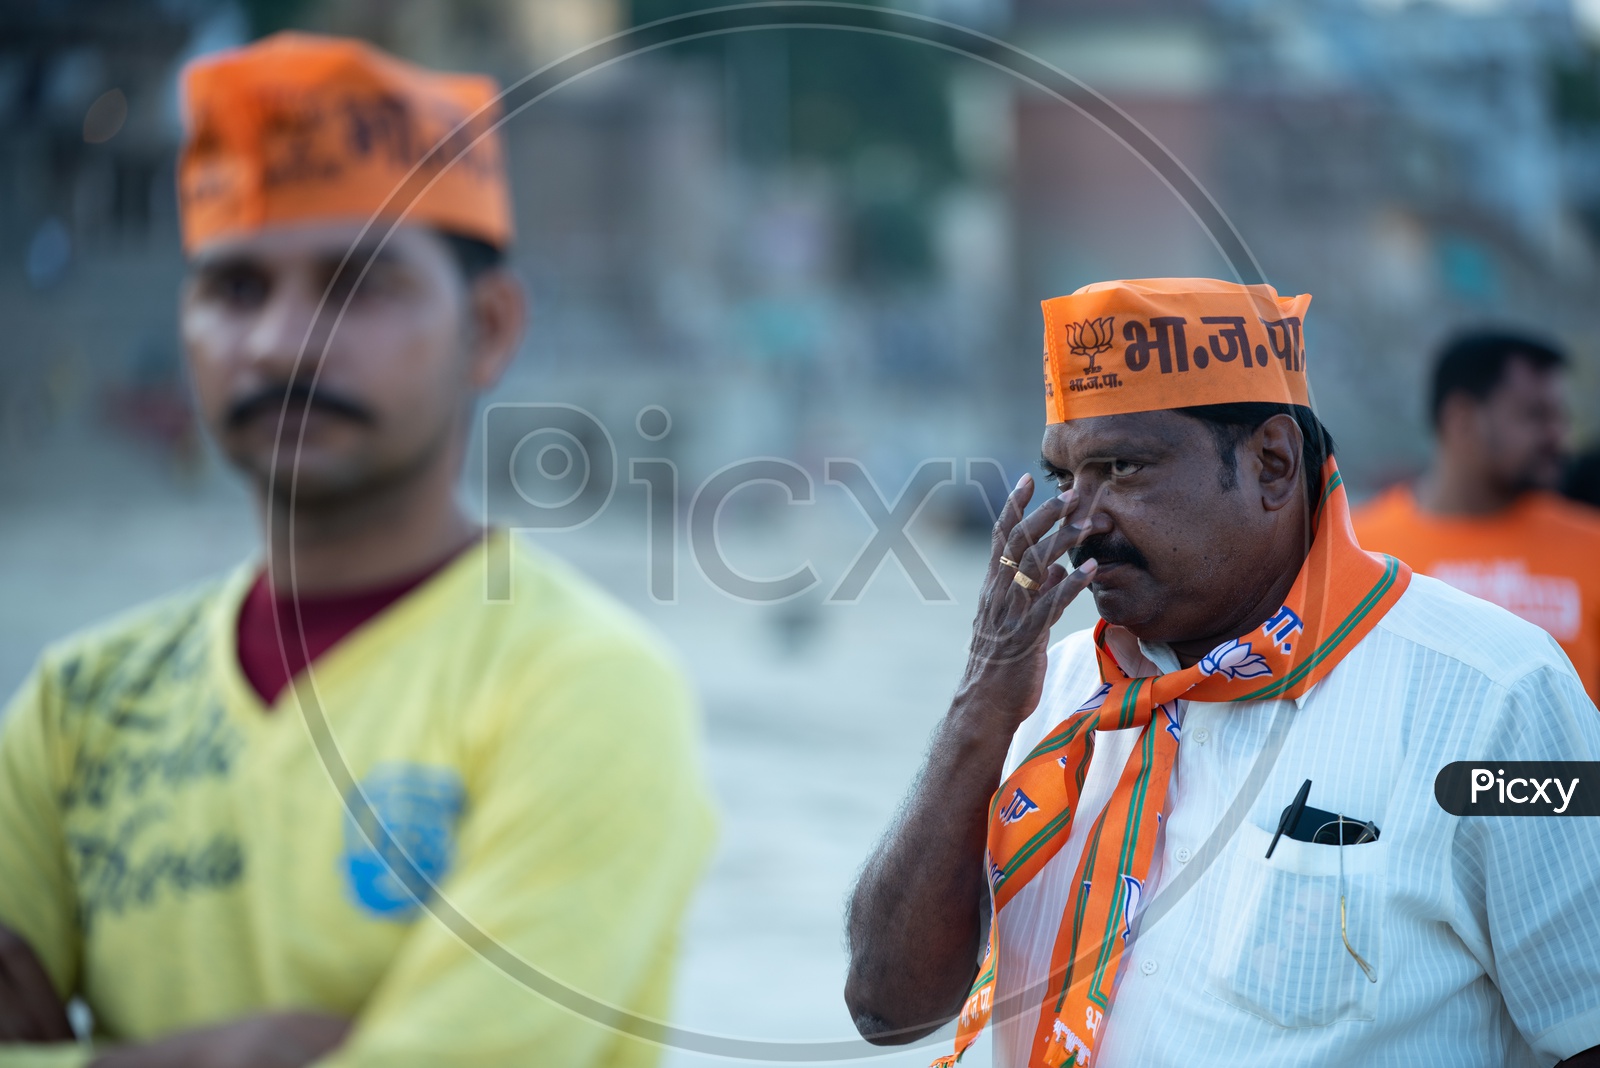 BJP Party Workers Or Supporters Wearing Party Caps And Towels In Election Campaigns